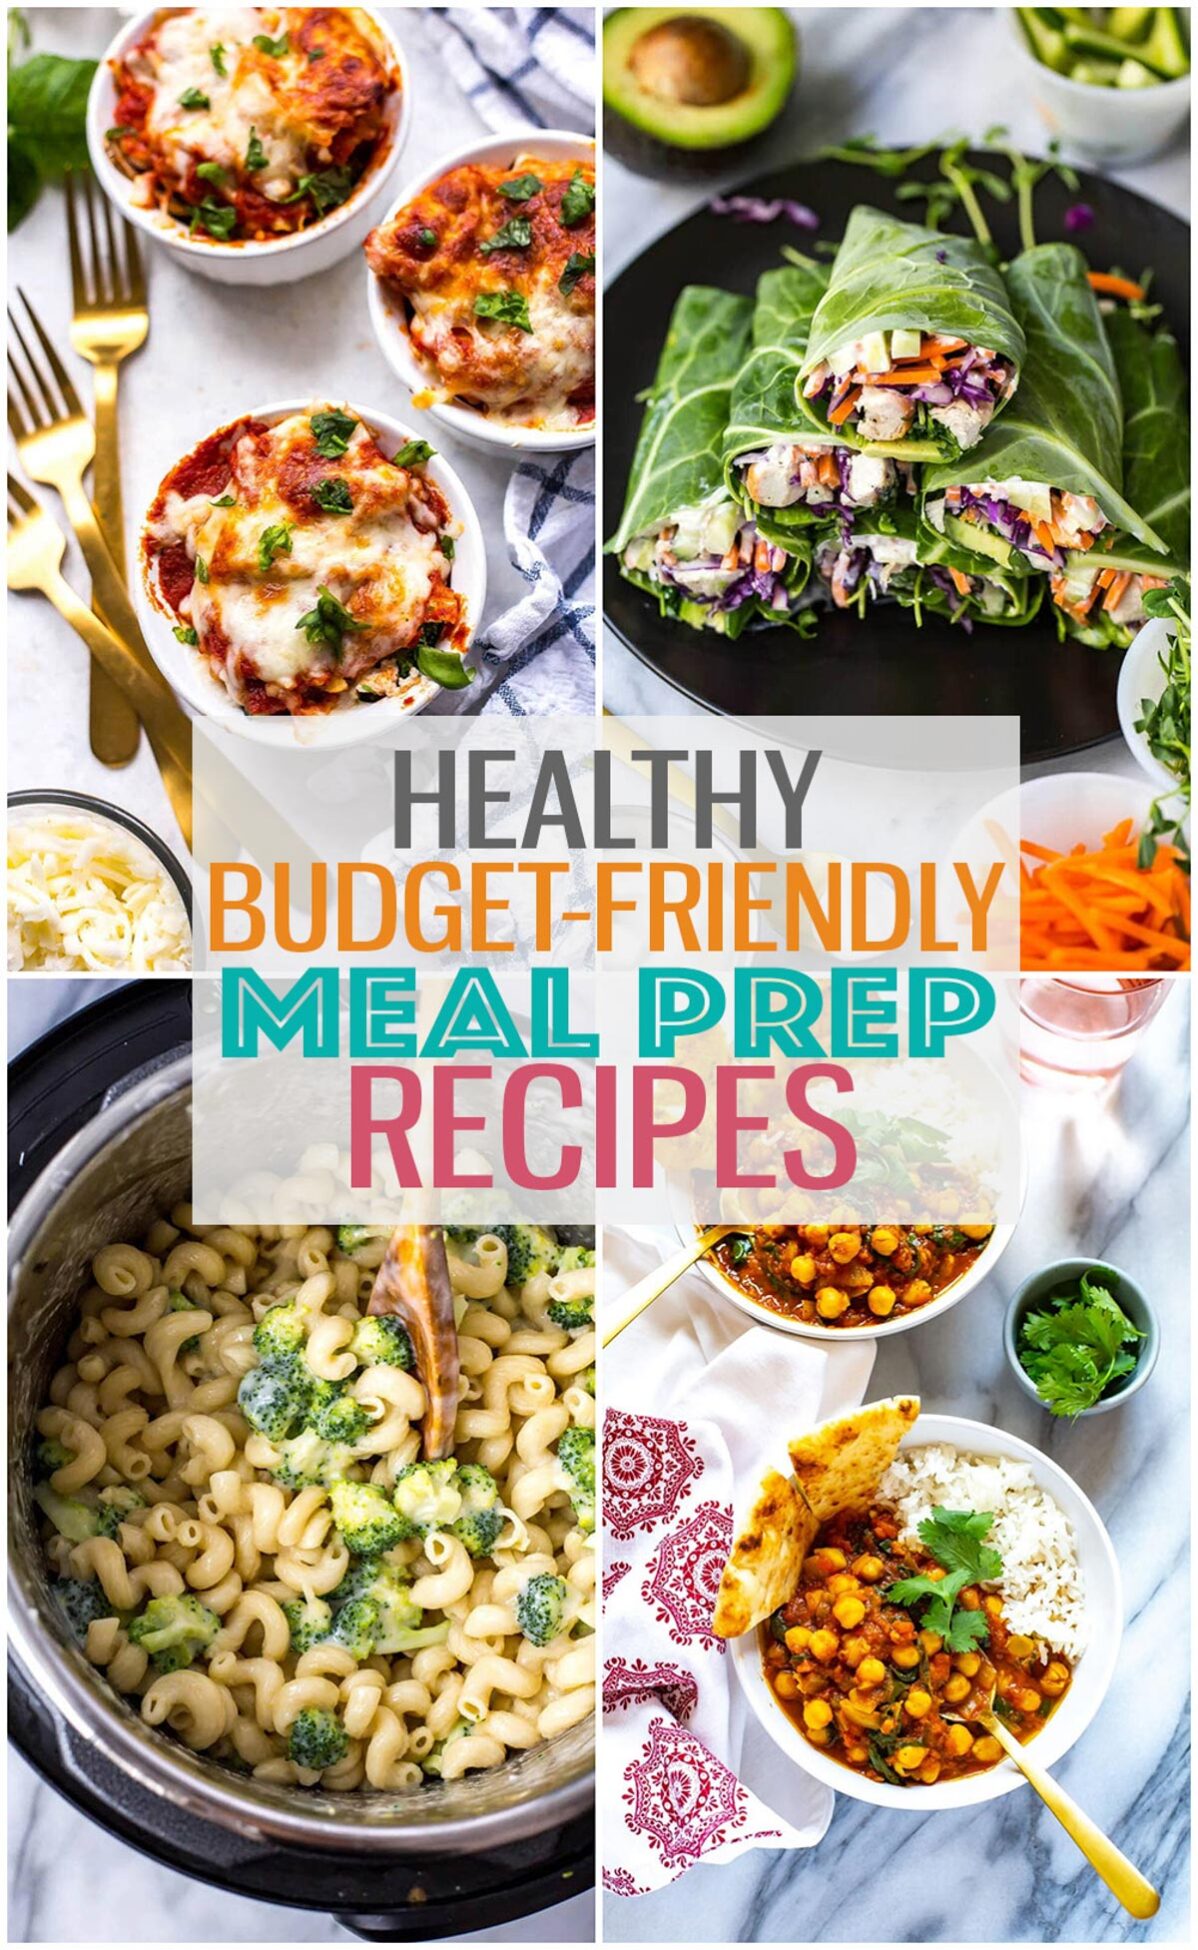 A collage of four different recipes with the text "Healthy Budget-Friendly Meal Prep Recipes" layered over top.